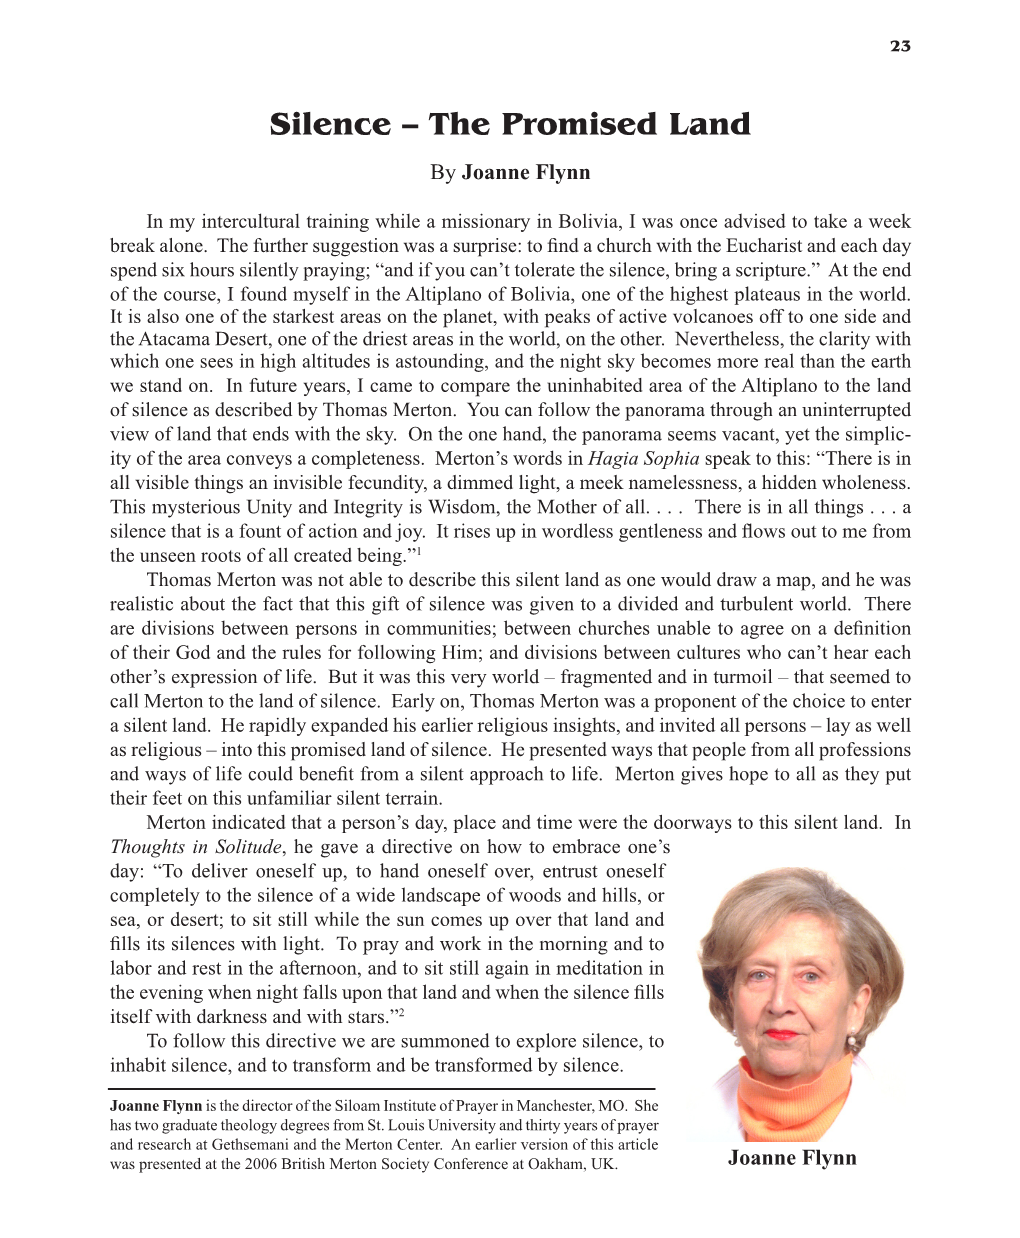 Silence – the Promised Land by Joanne Flynn